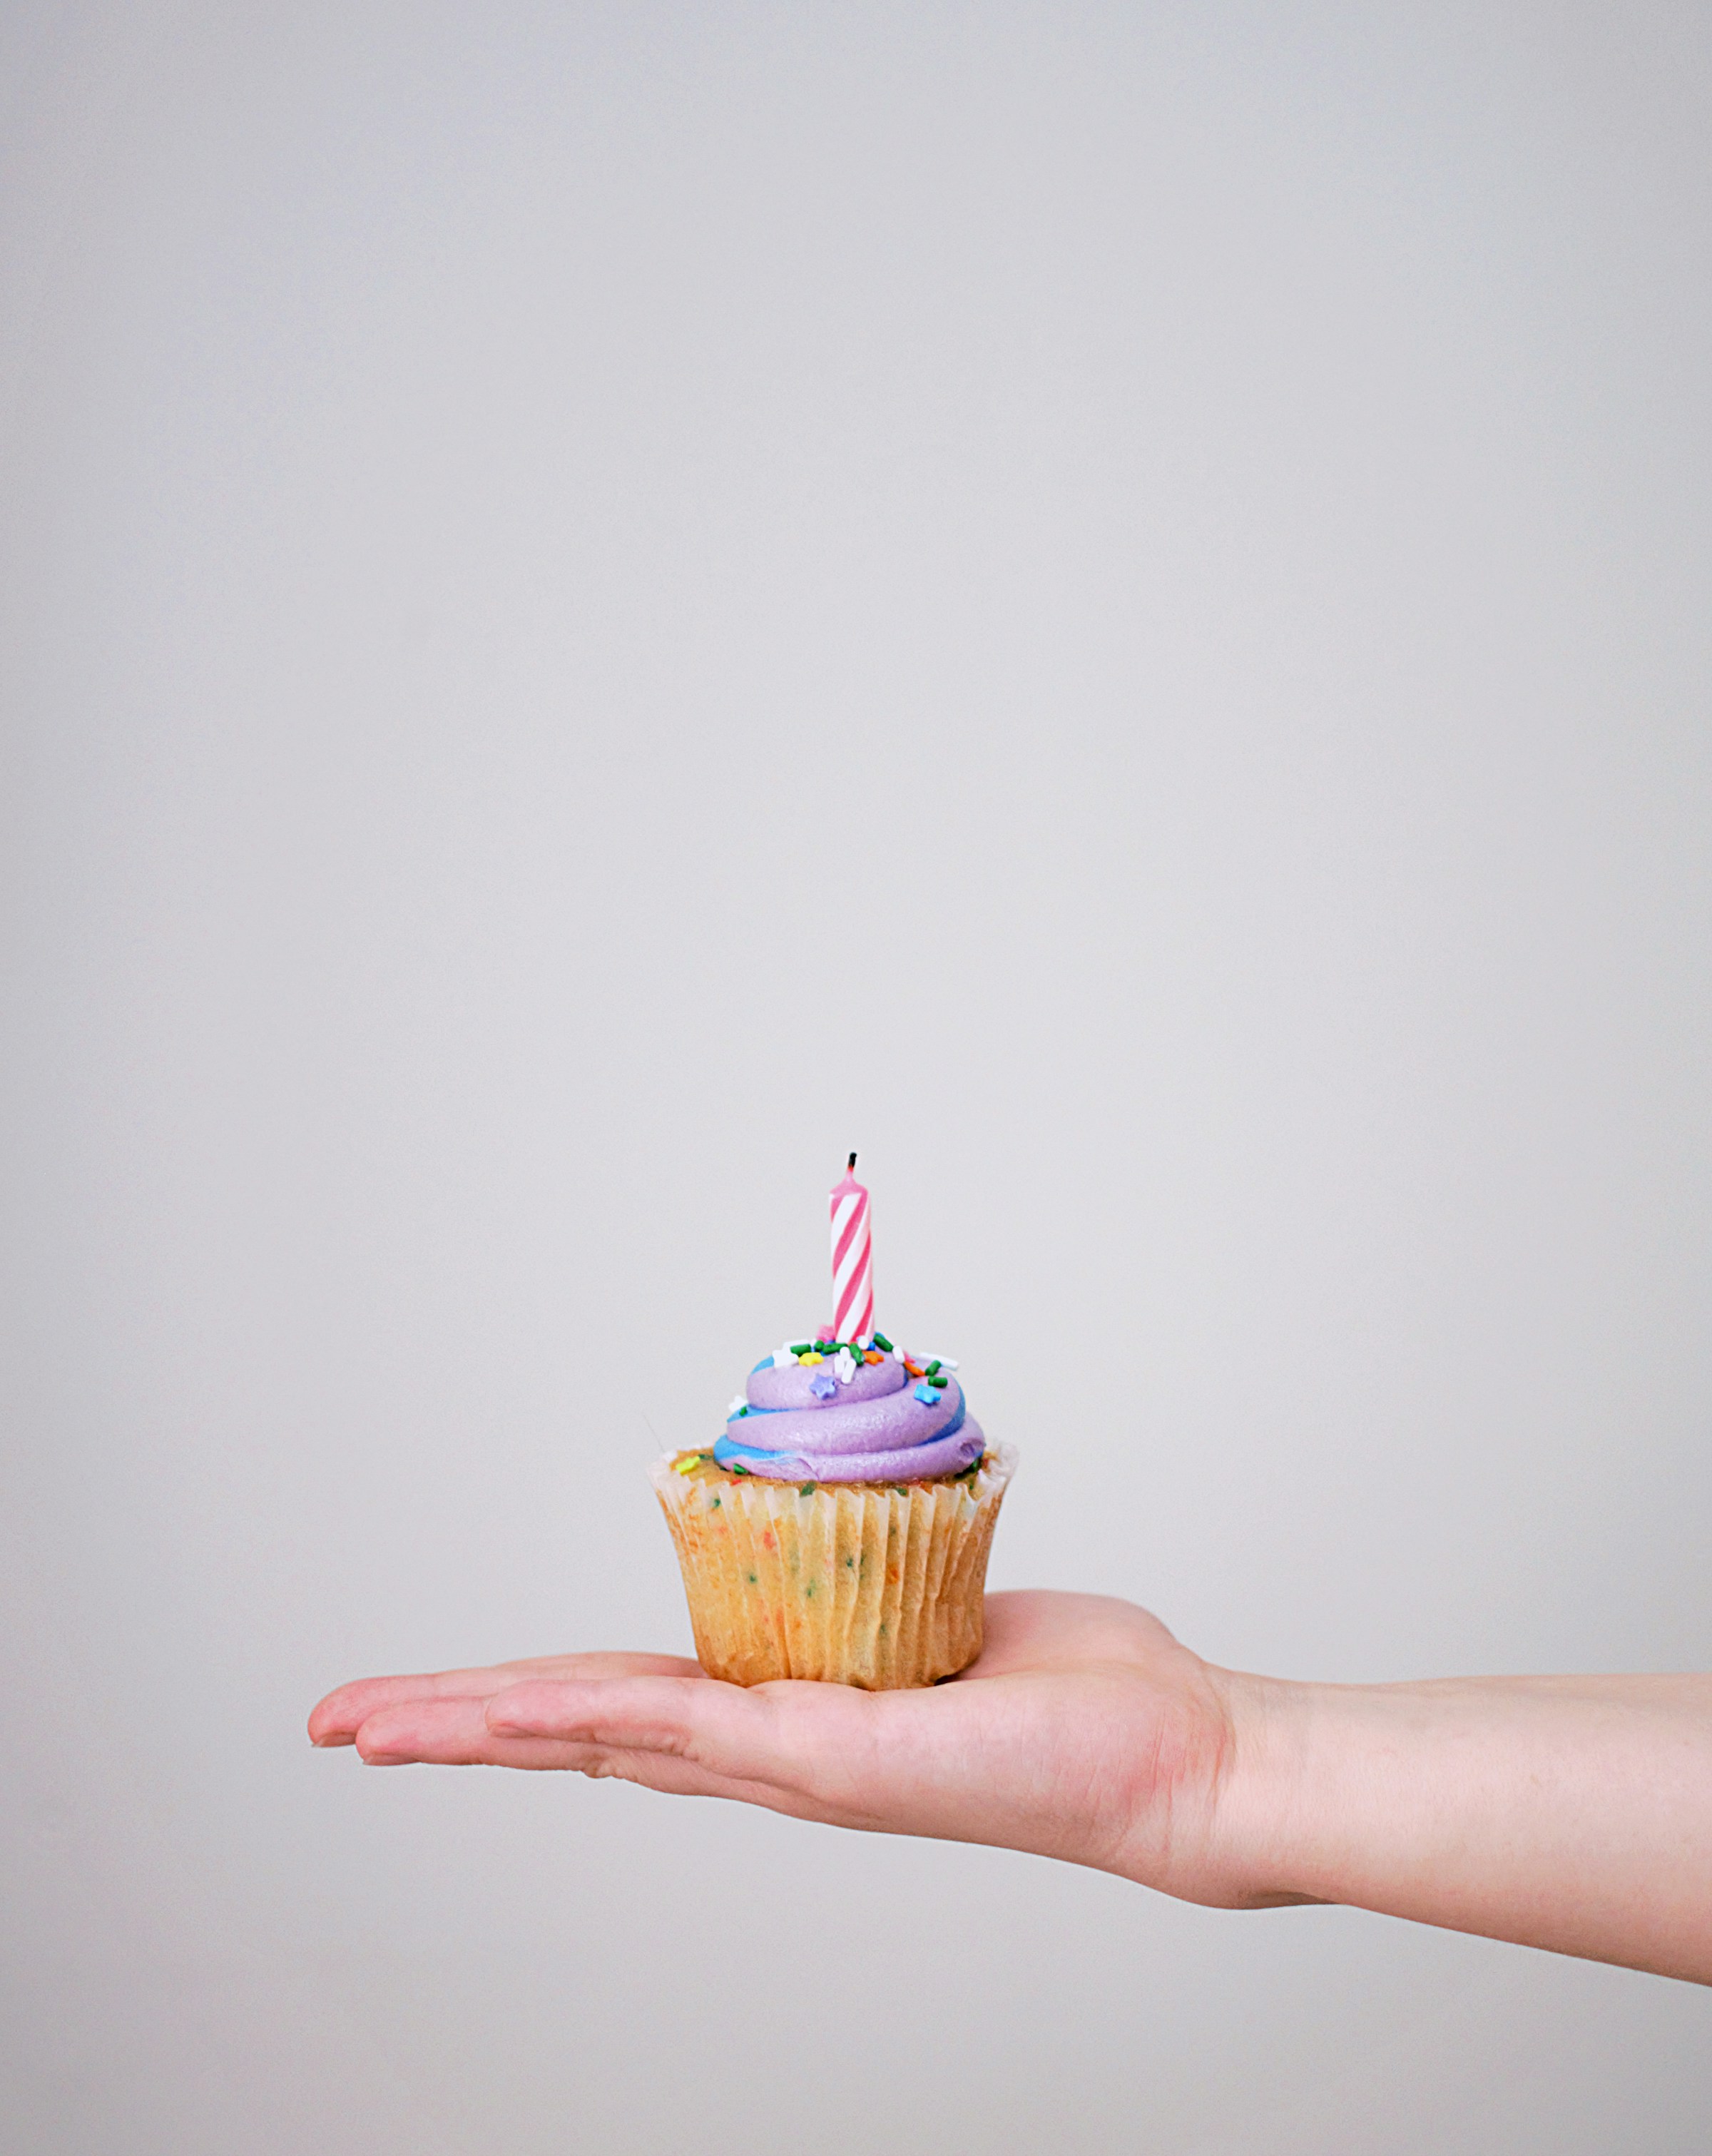 Cupcake with a candle | Source: Unsplash